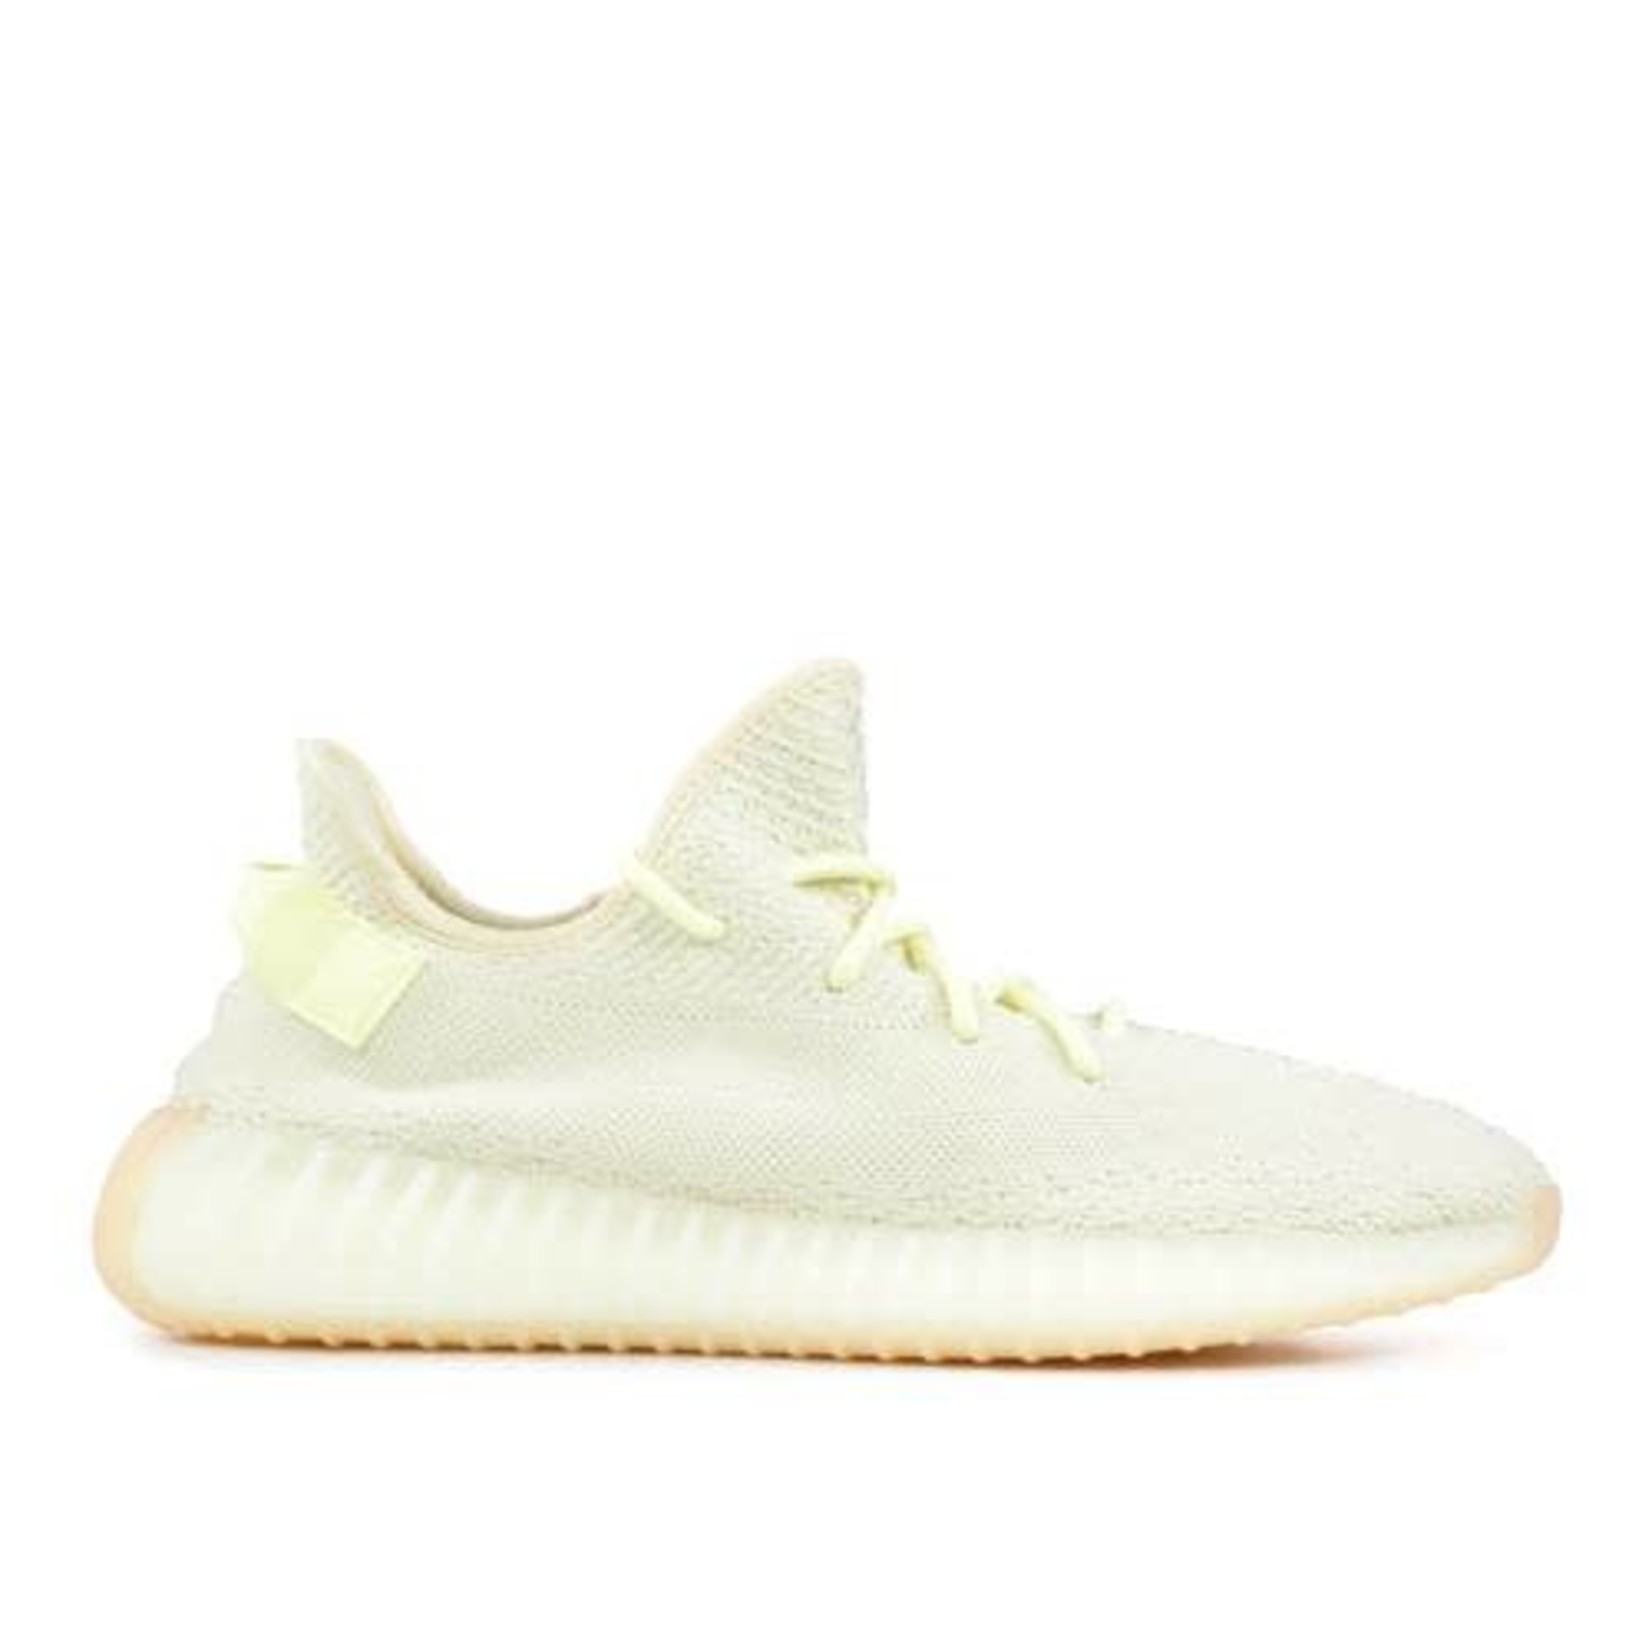 Adidas adidas Yeezy Boost 350 V2 Butter Size 11.5, DS BRAND NEW